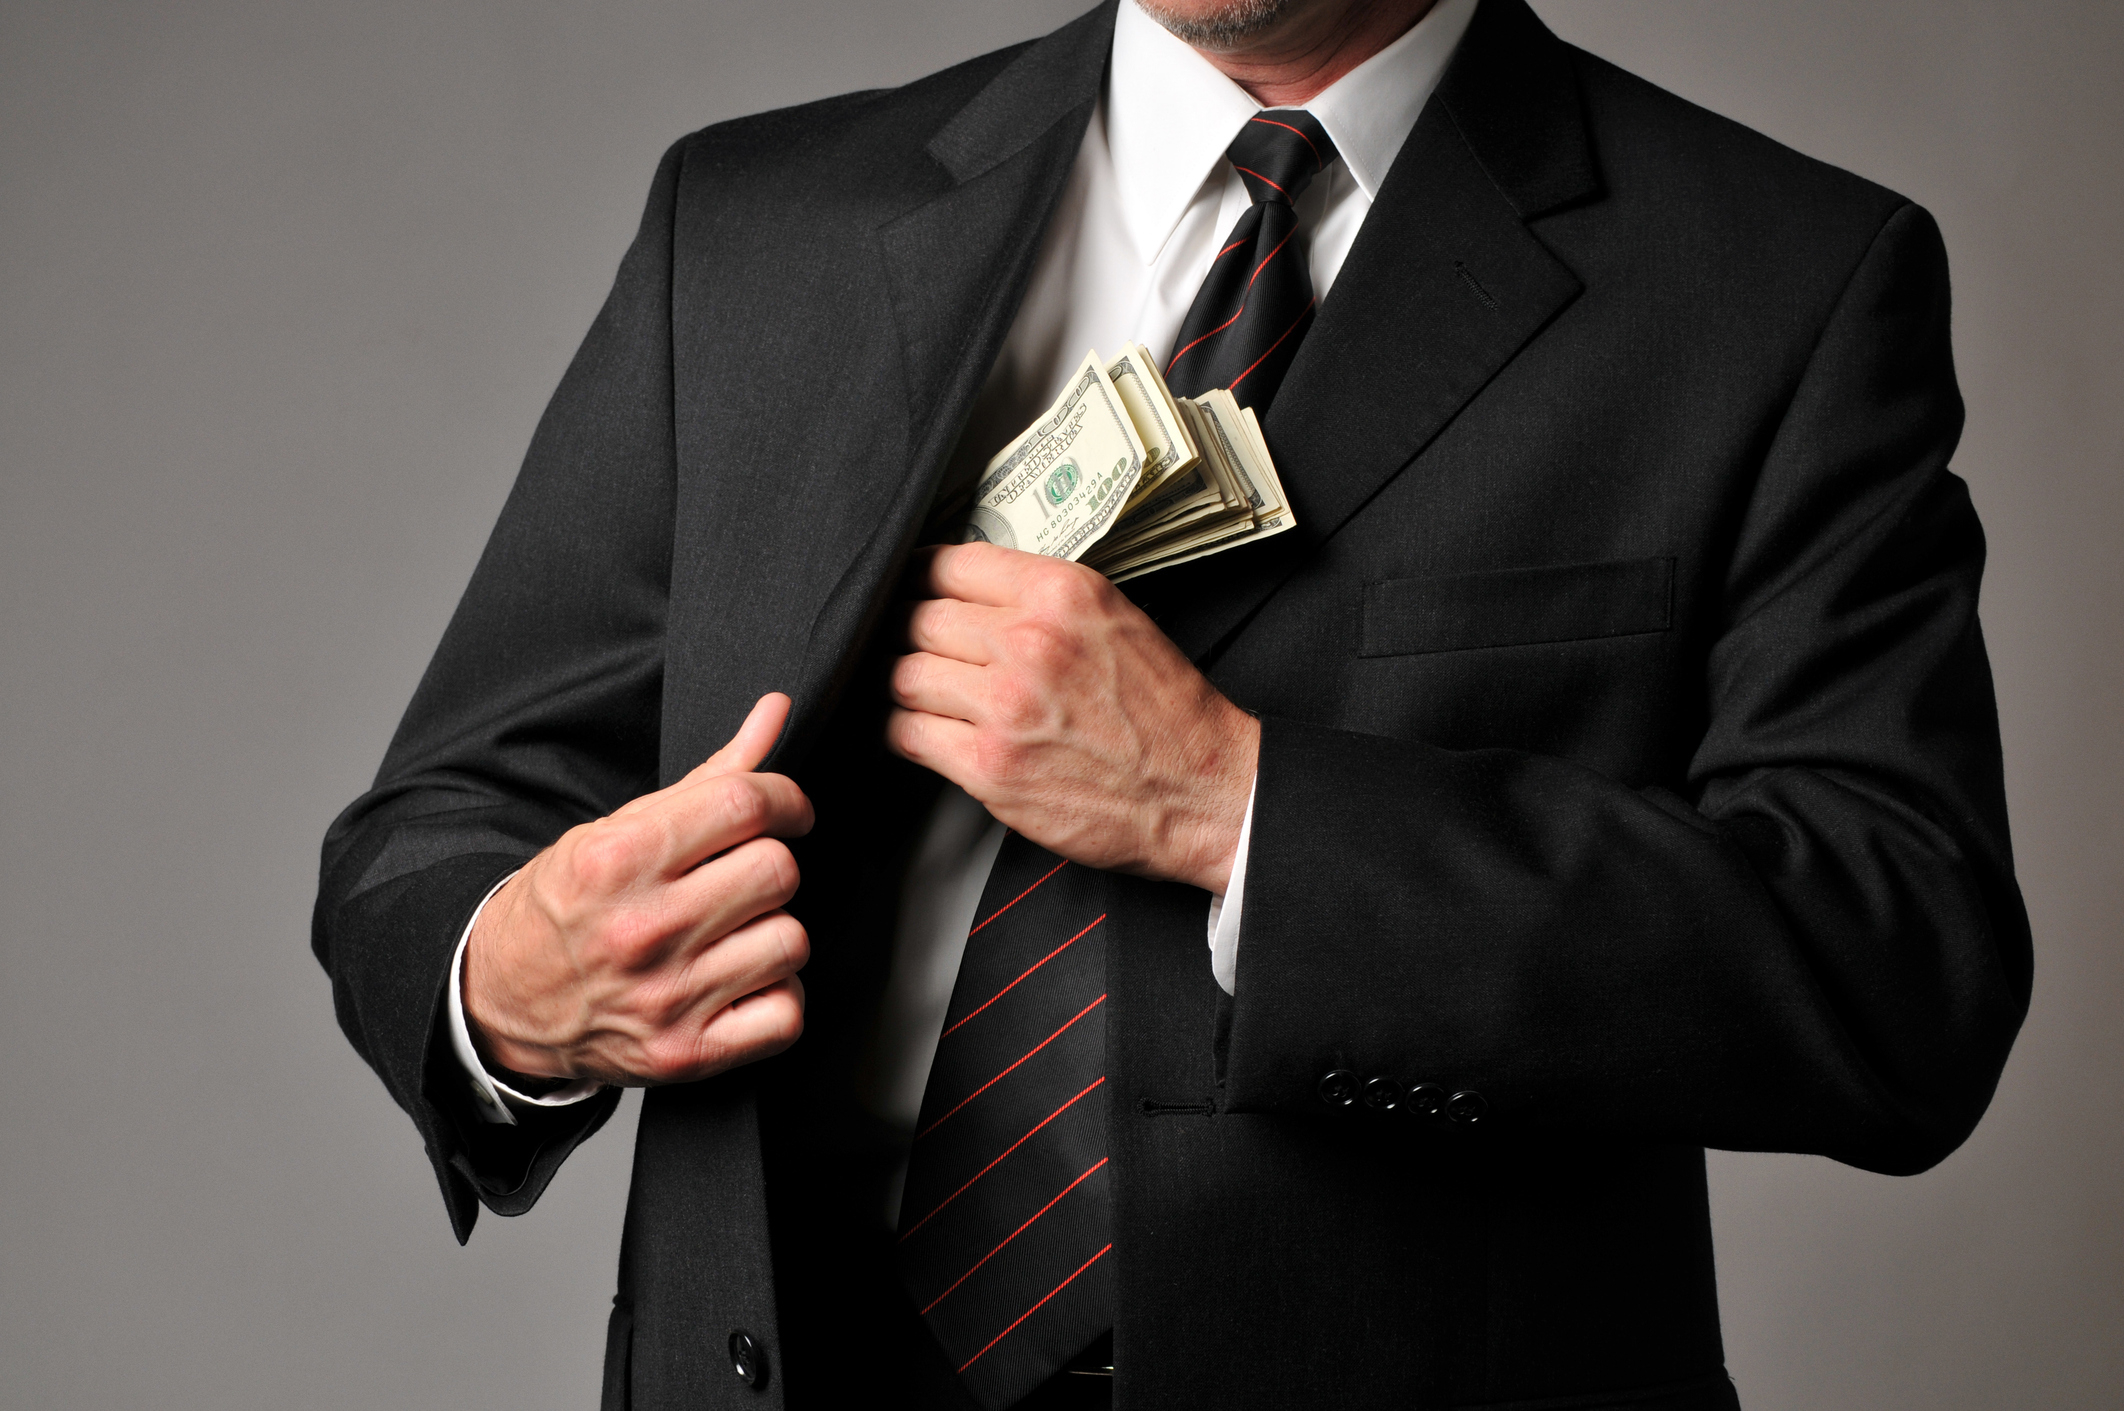 A man in a suit and tie puts a stack of money into his jacket pocket